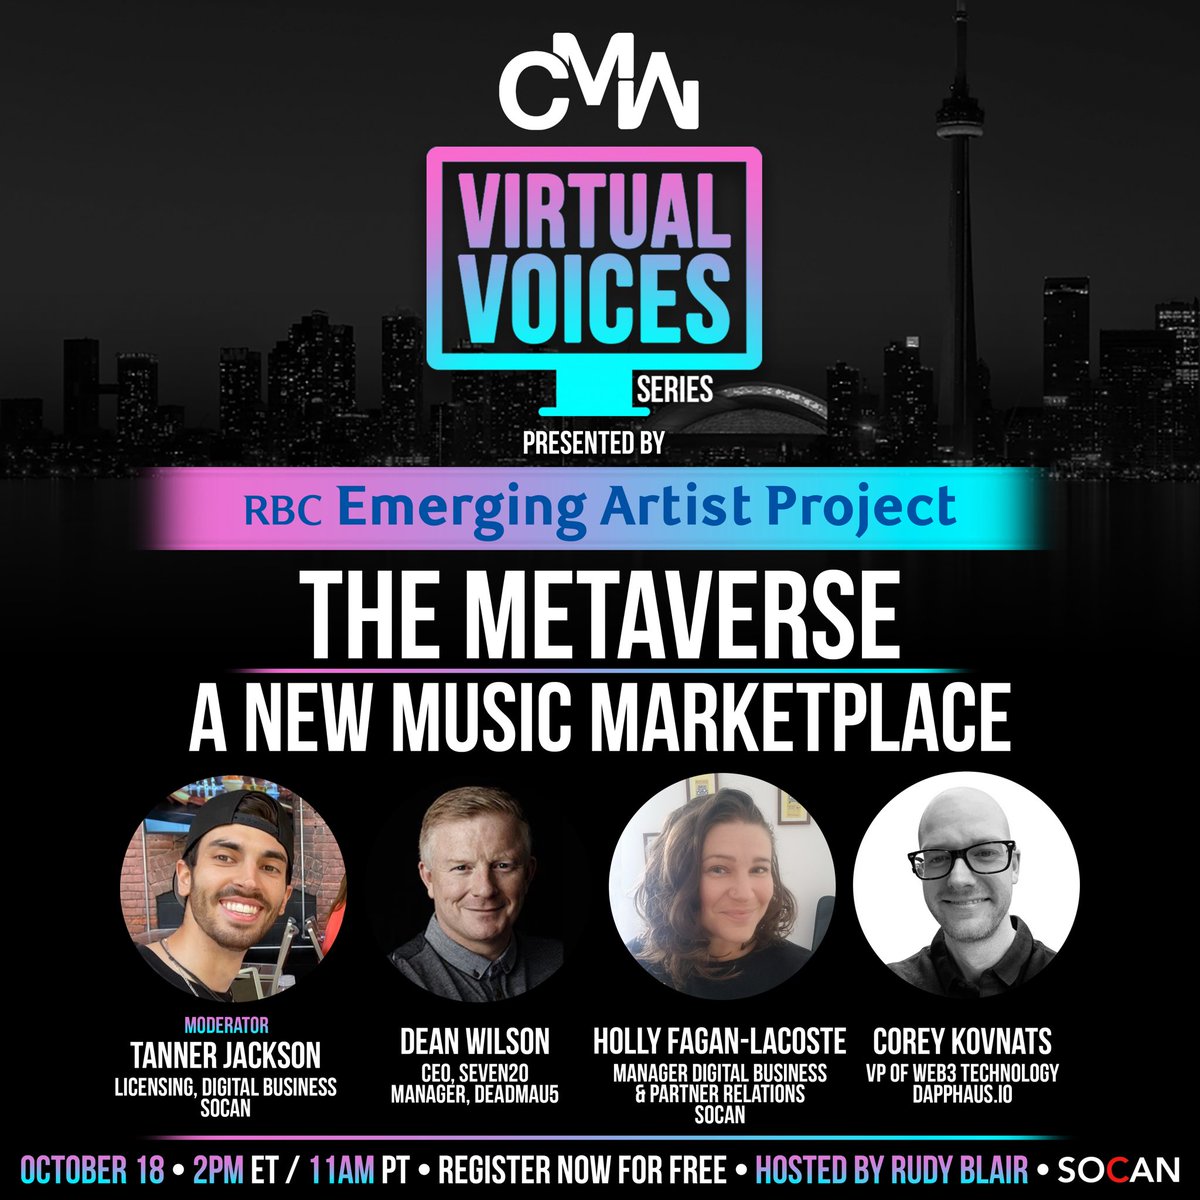 Virtual Voices is back on Tuesday, October 18th at 2pm ET. Register now for FREE -> bit.ly/3RwhbqF